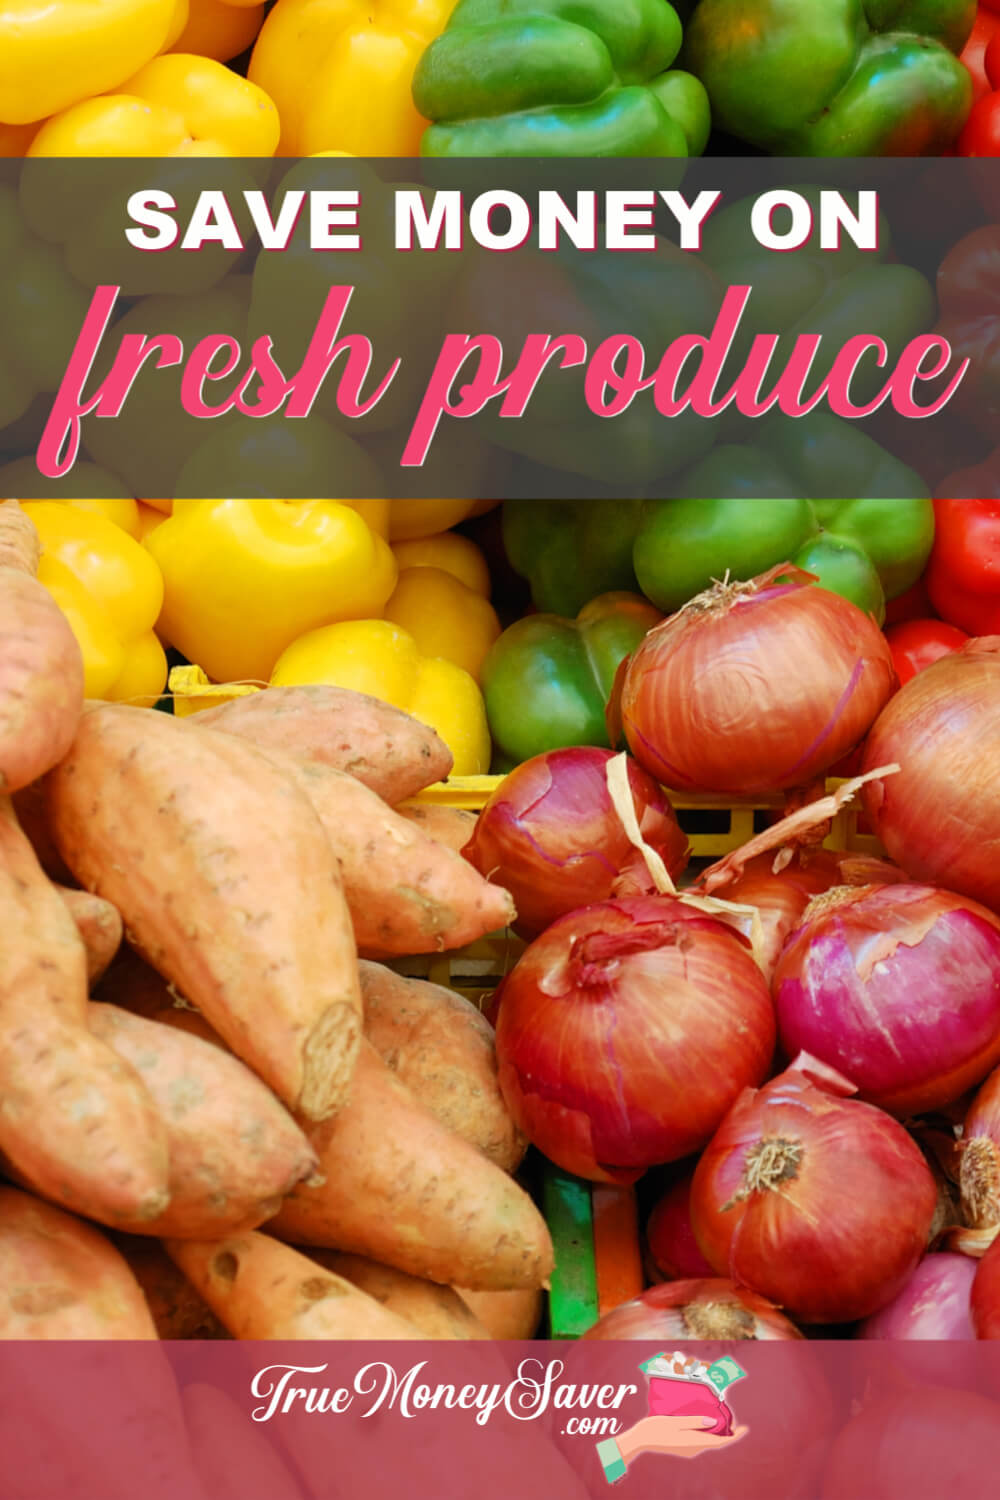 The Most Surprising & Creative Ways To Save On Produce